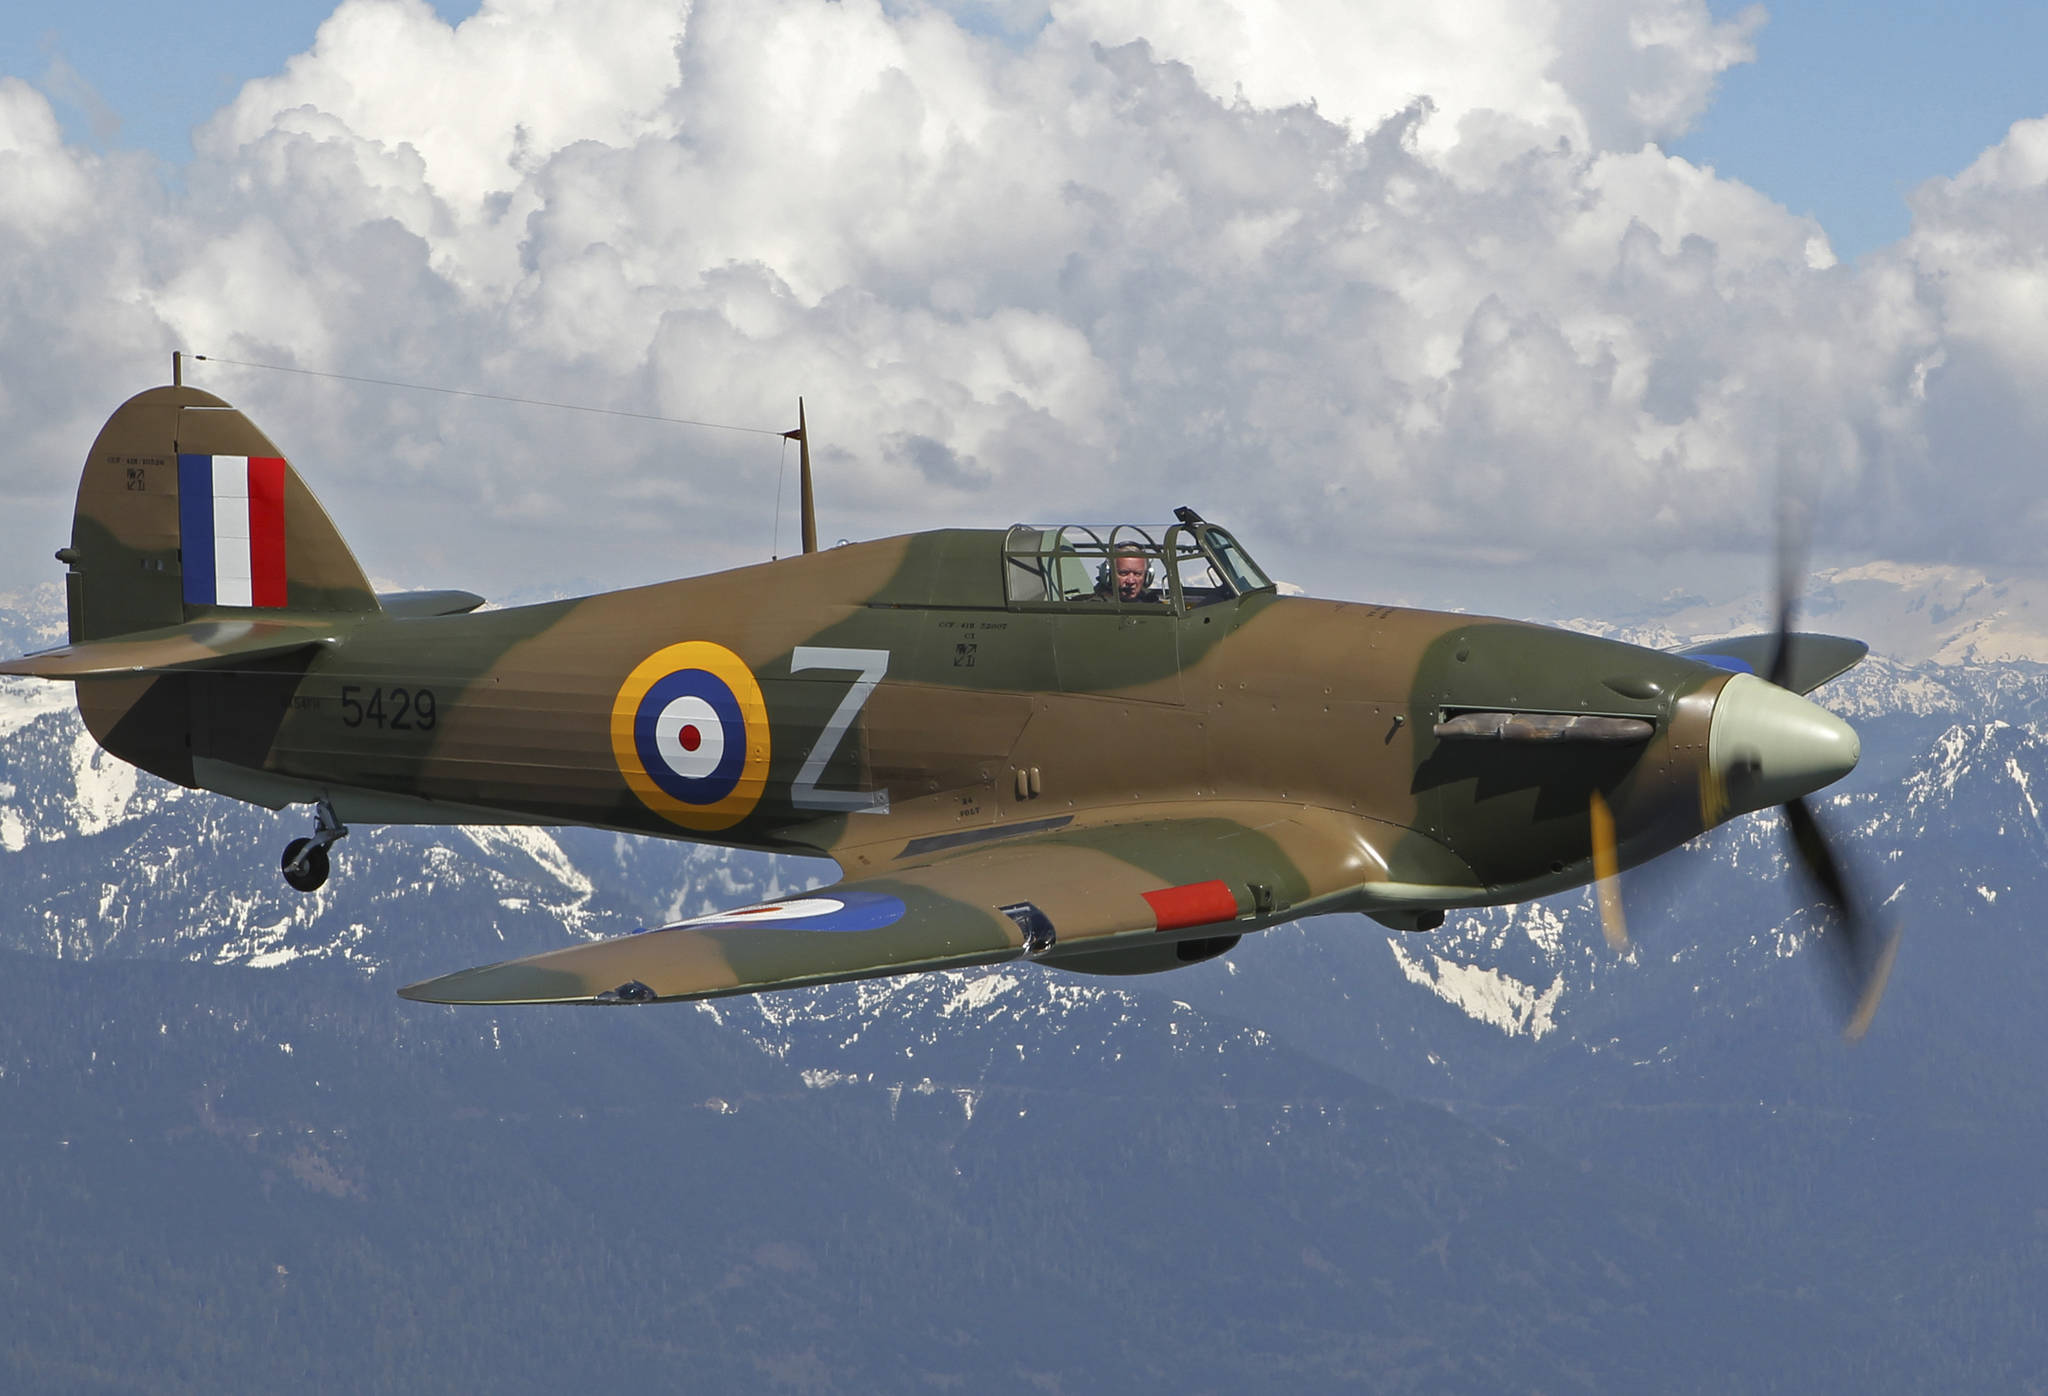 The historic UK Hurricane warbird is expected to be at the Arlington Fly-In this week.